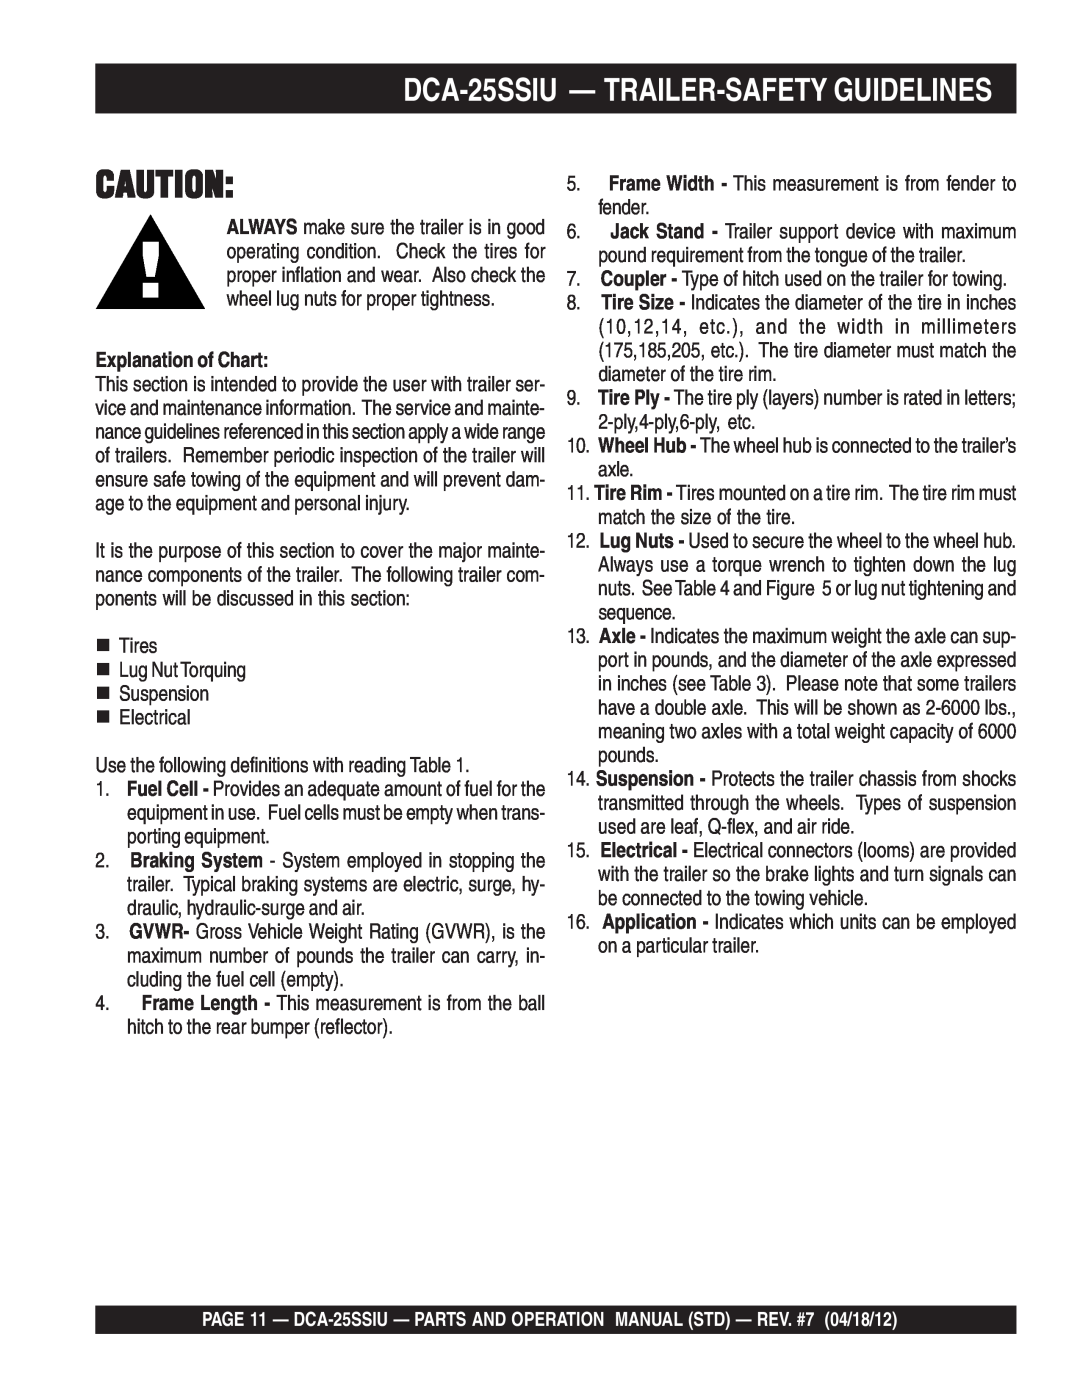 Multiquip DCA25SSIU manual DCA-25SSIU- TRAILER-SAFETYGUIDELINES, Explanation of Chart 